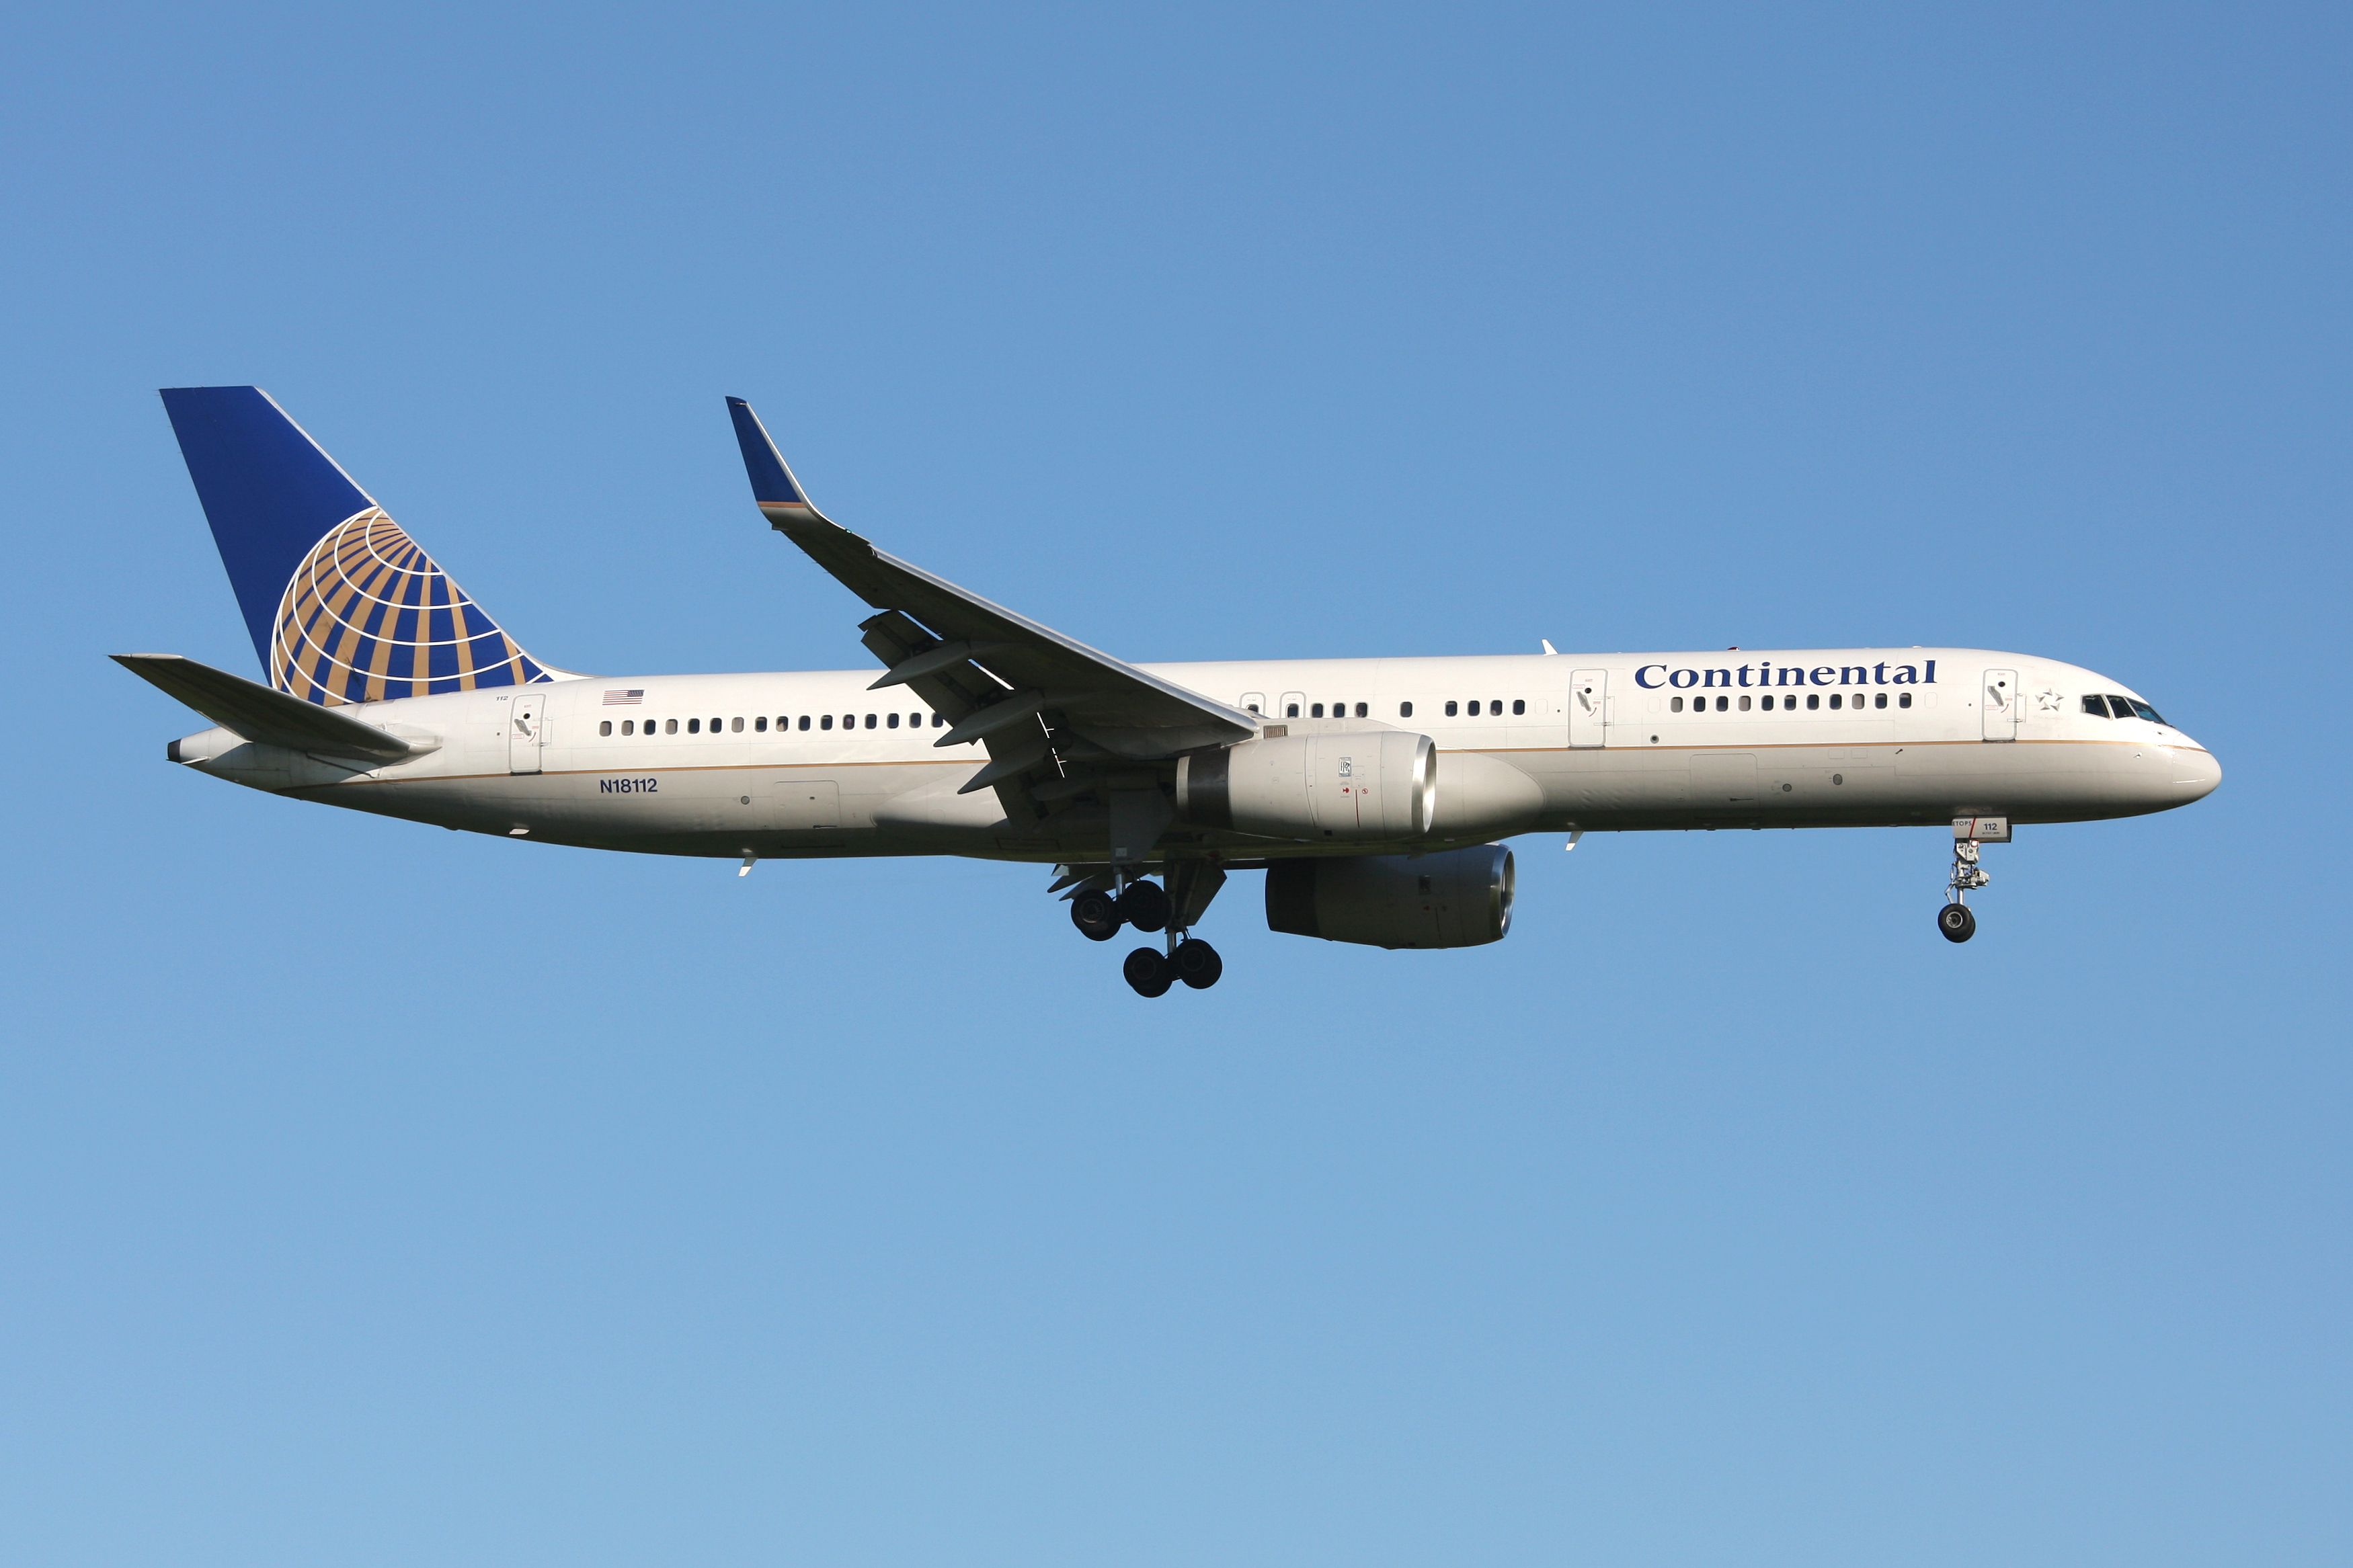 A Continental Airlines Boeing 757-200 Flying In The Sky.